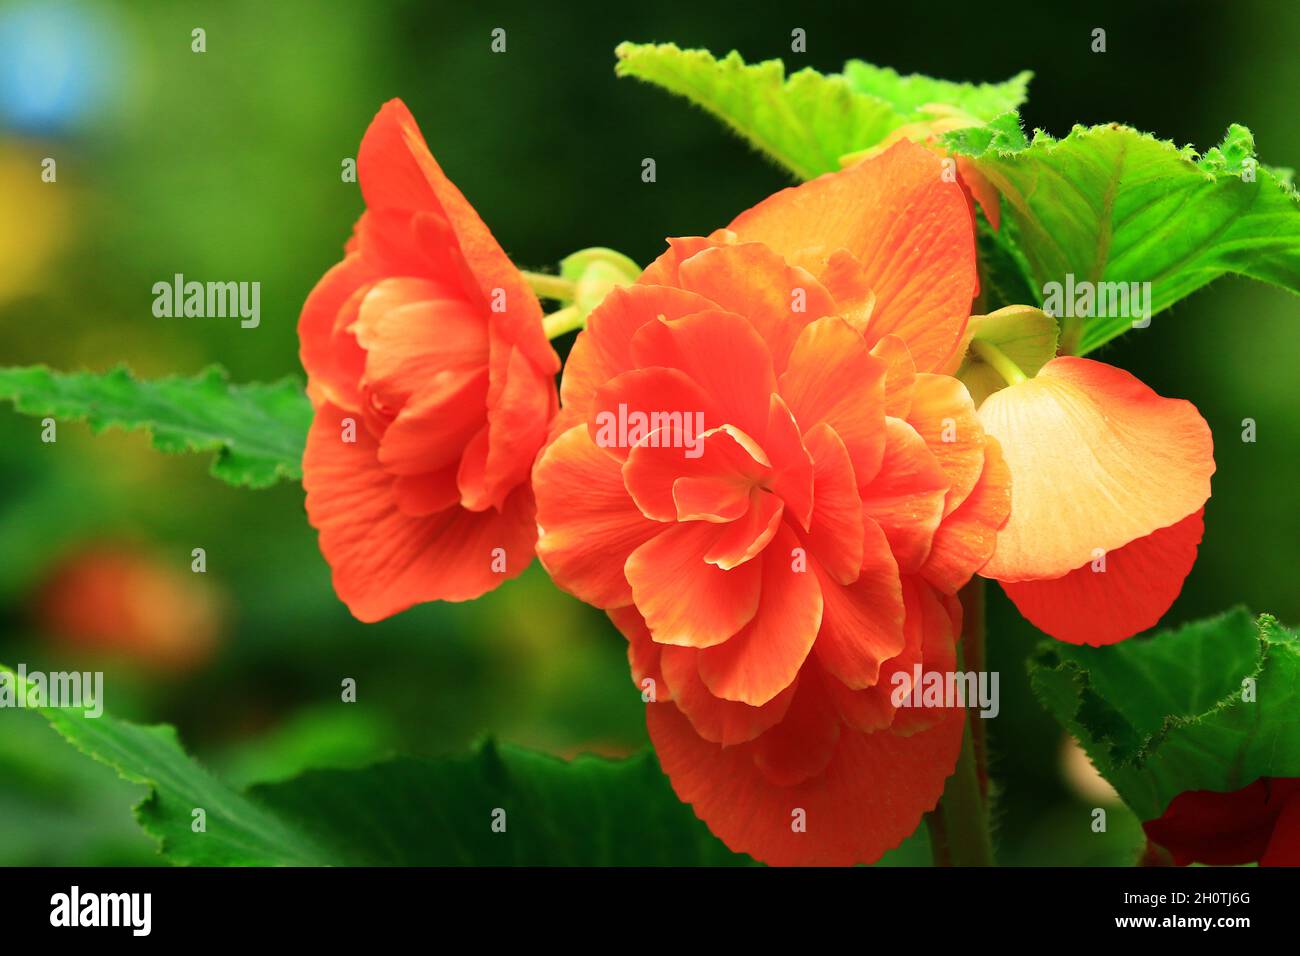 beautiful view of blooming Begonia flowers,close-up of orange Begonia flowers blooming in the garden Stock Photo